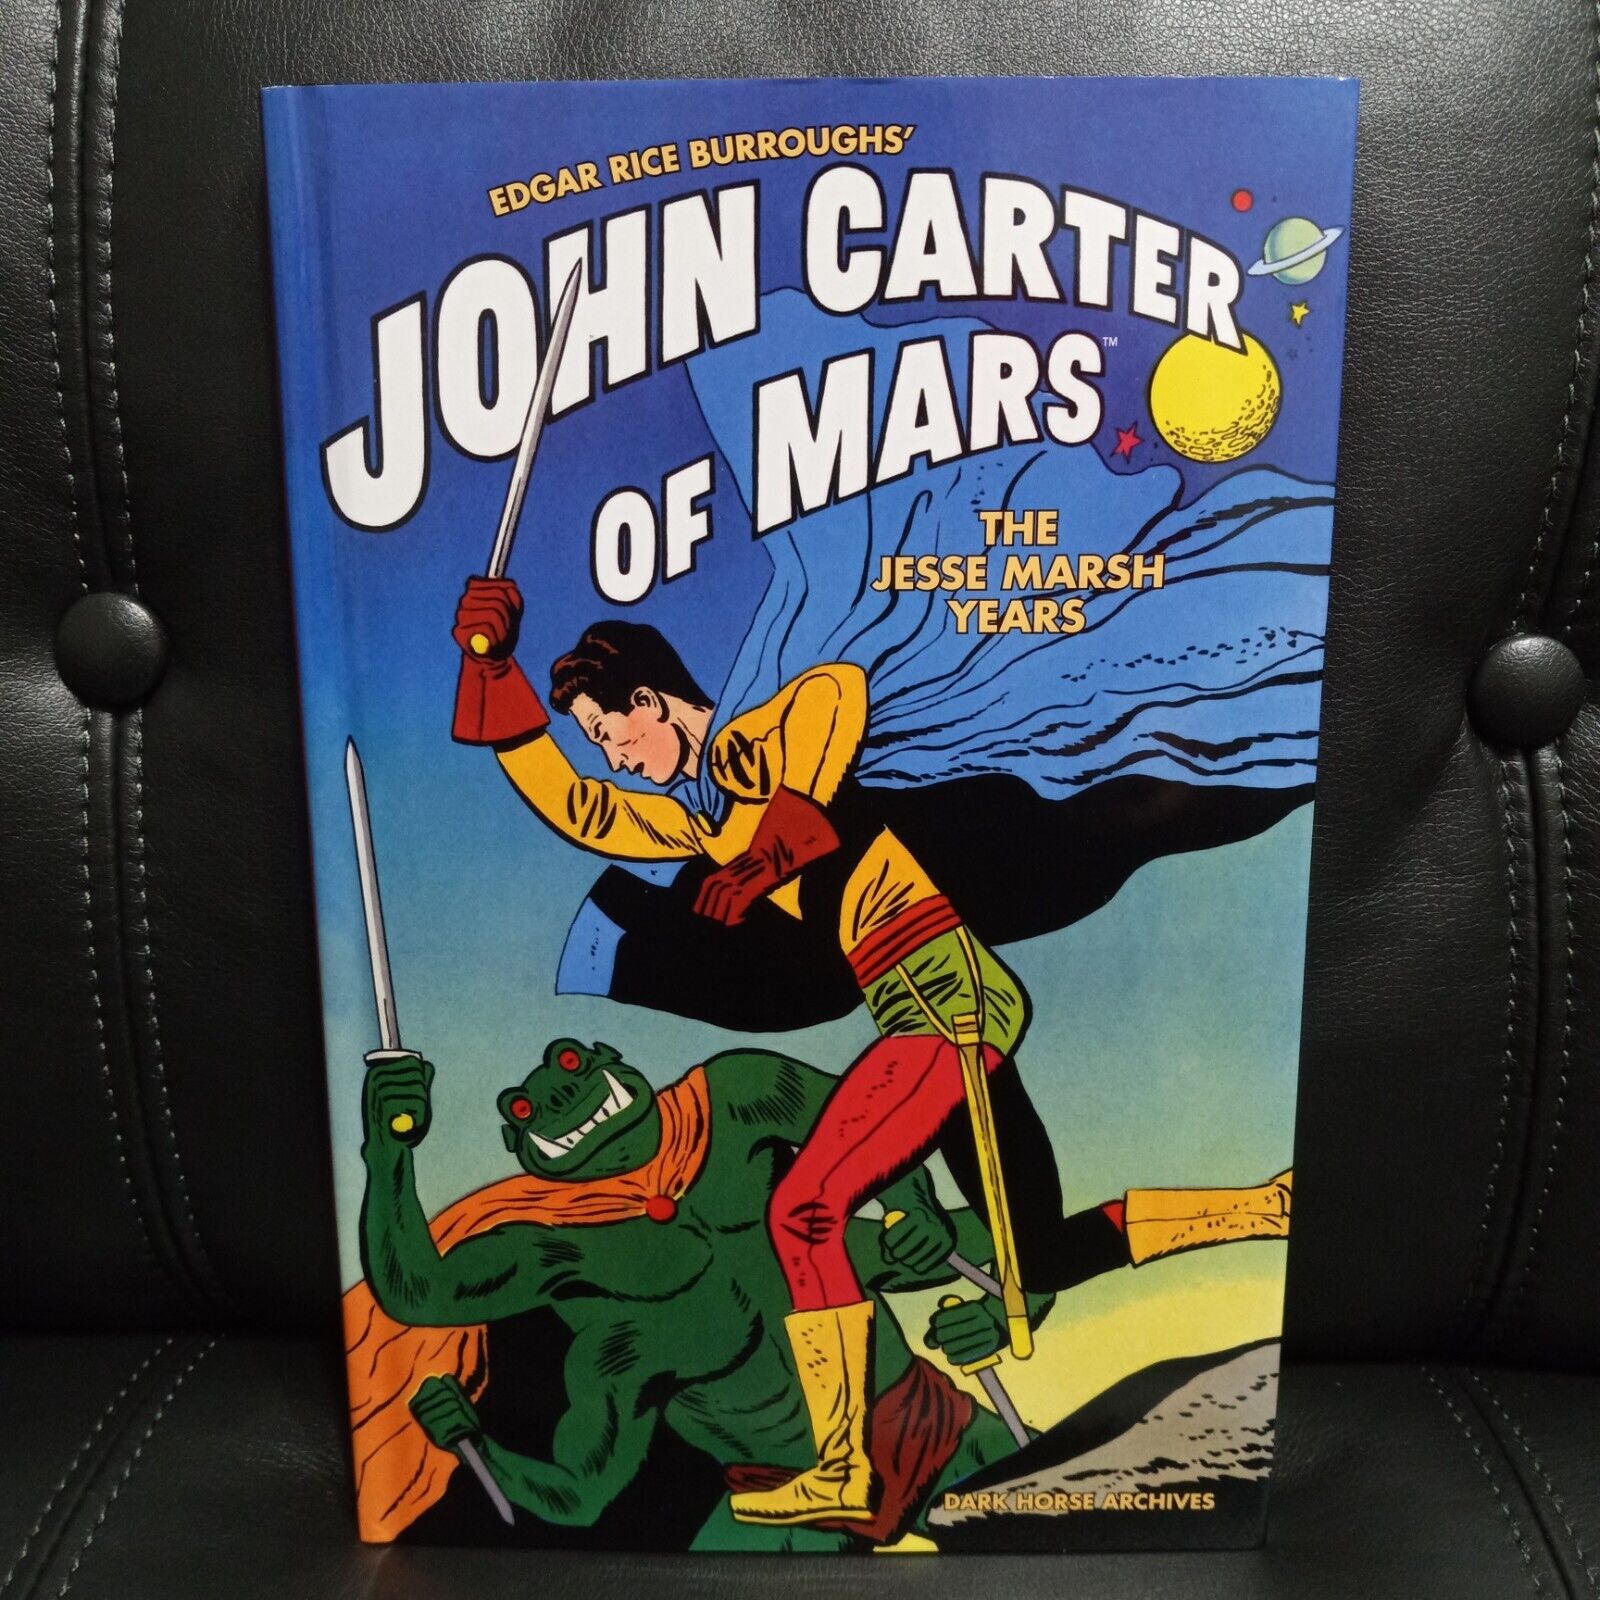 John Carter of Mars The Jesse Marsh Years Hard Cover. First Edition, May 2010 